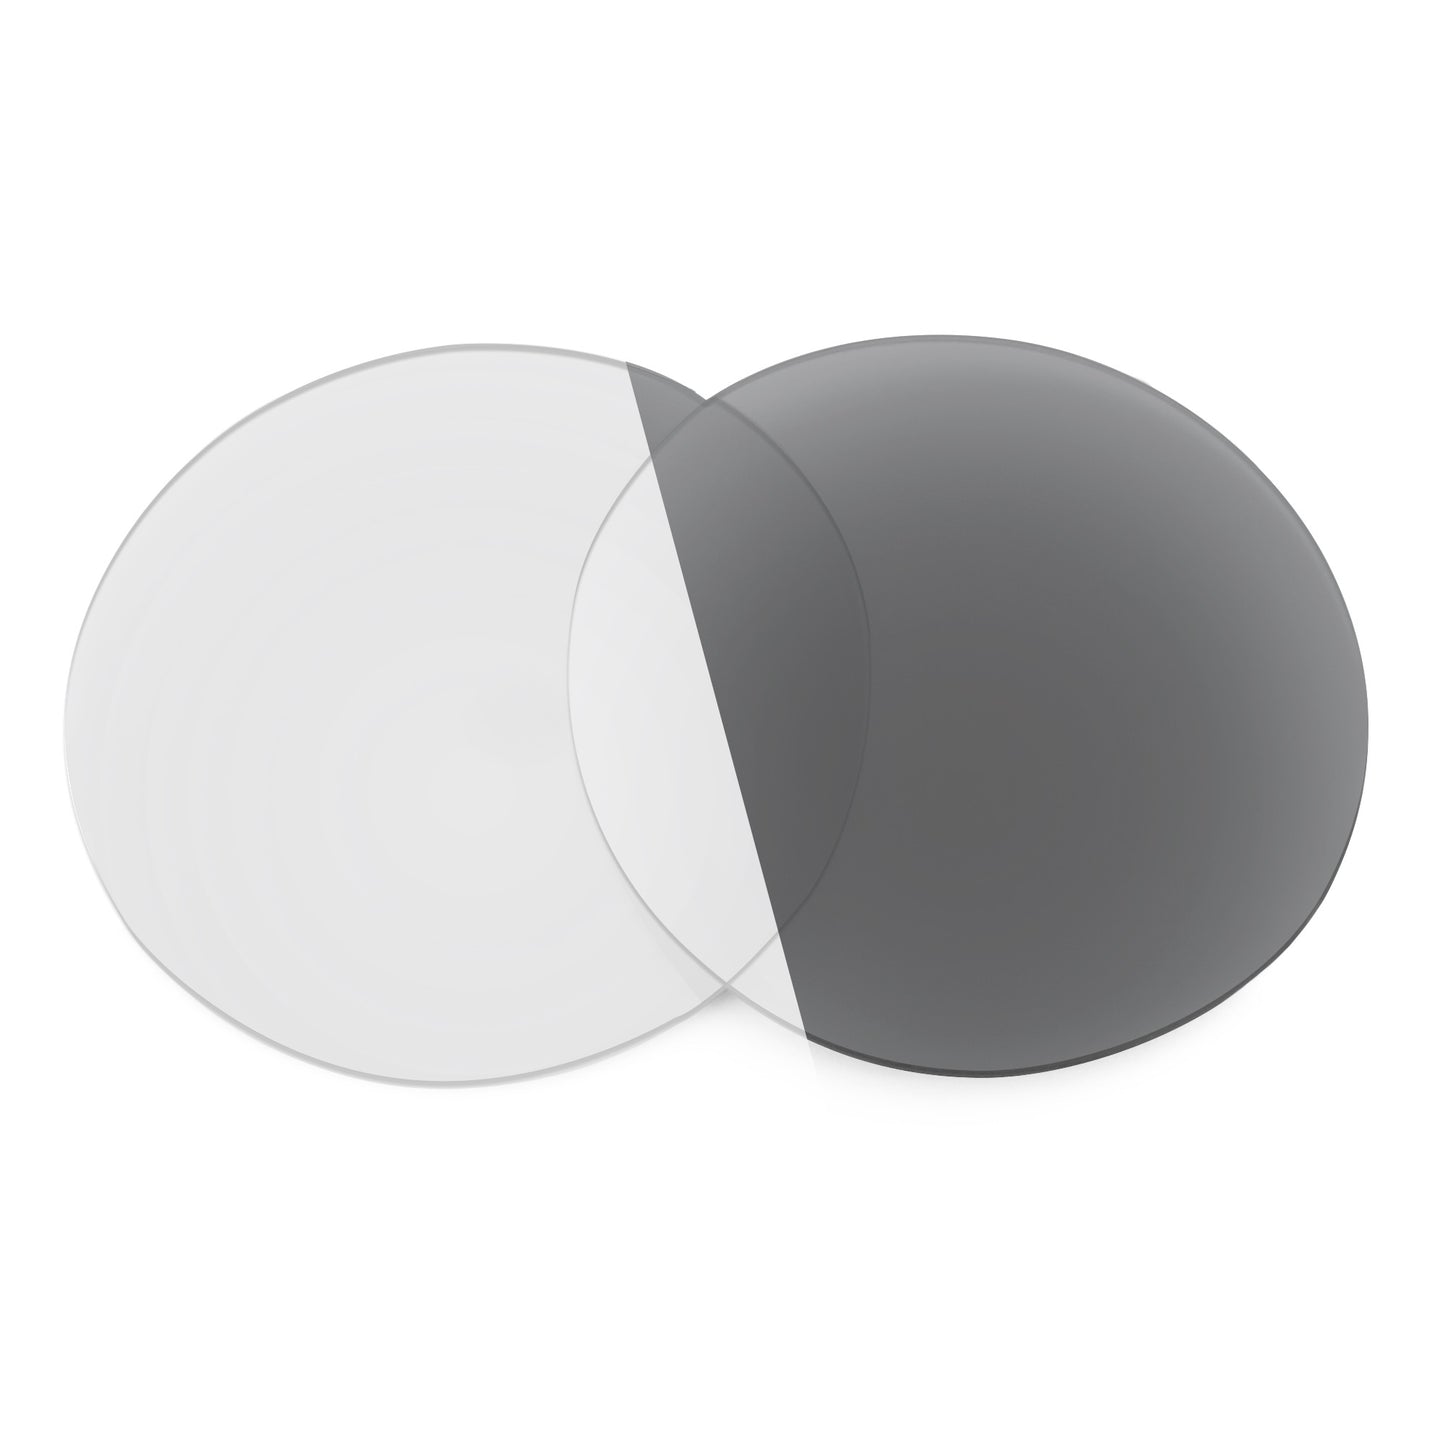 Revant replacement lenses for Ray-Ban Sidestreet W2319 (B&L) 50mm Non-Polarized Adapt Gray Photochromic